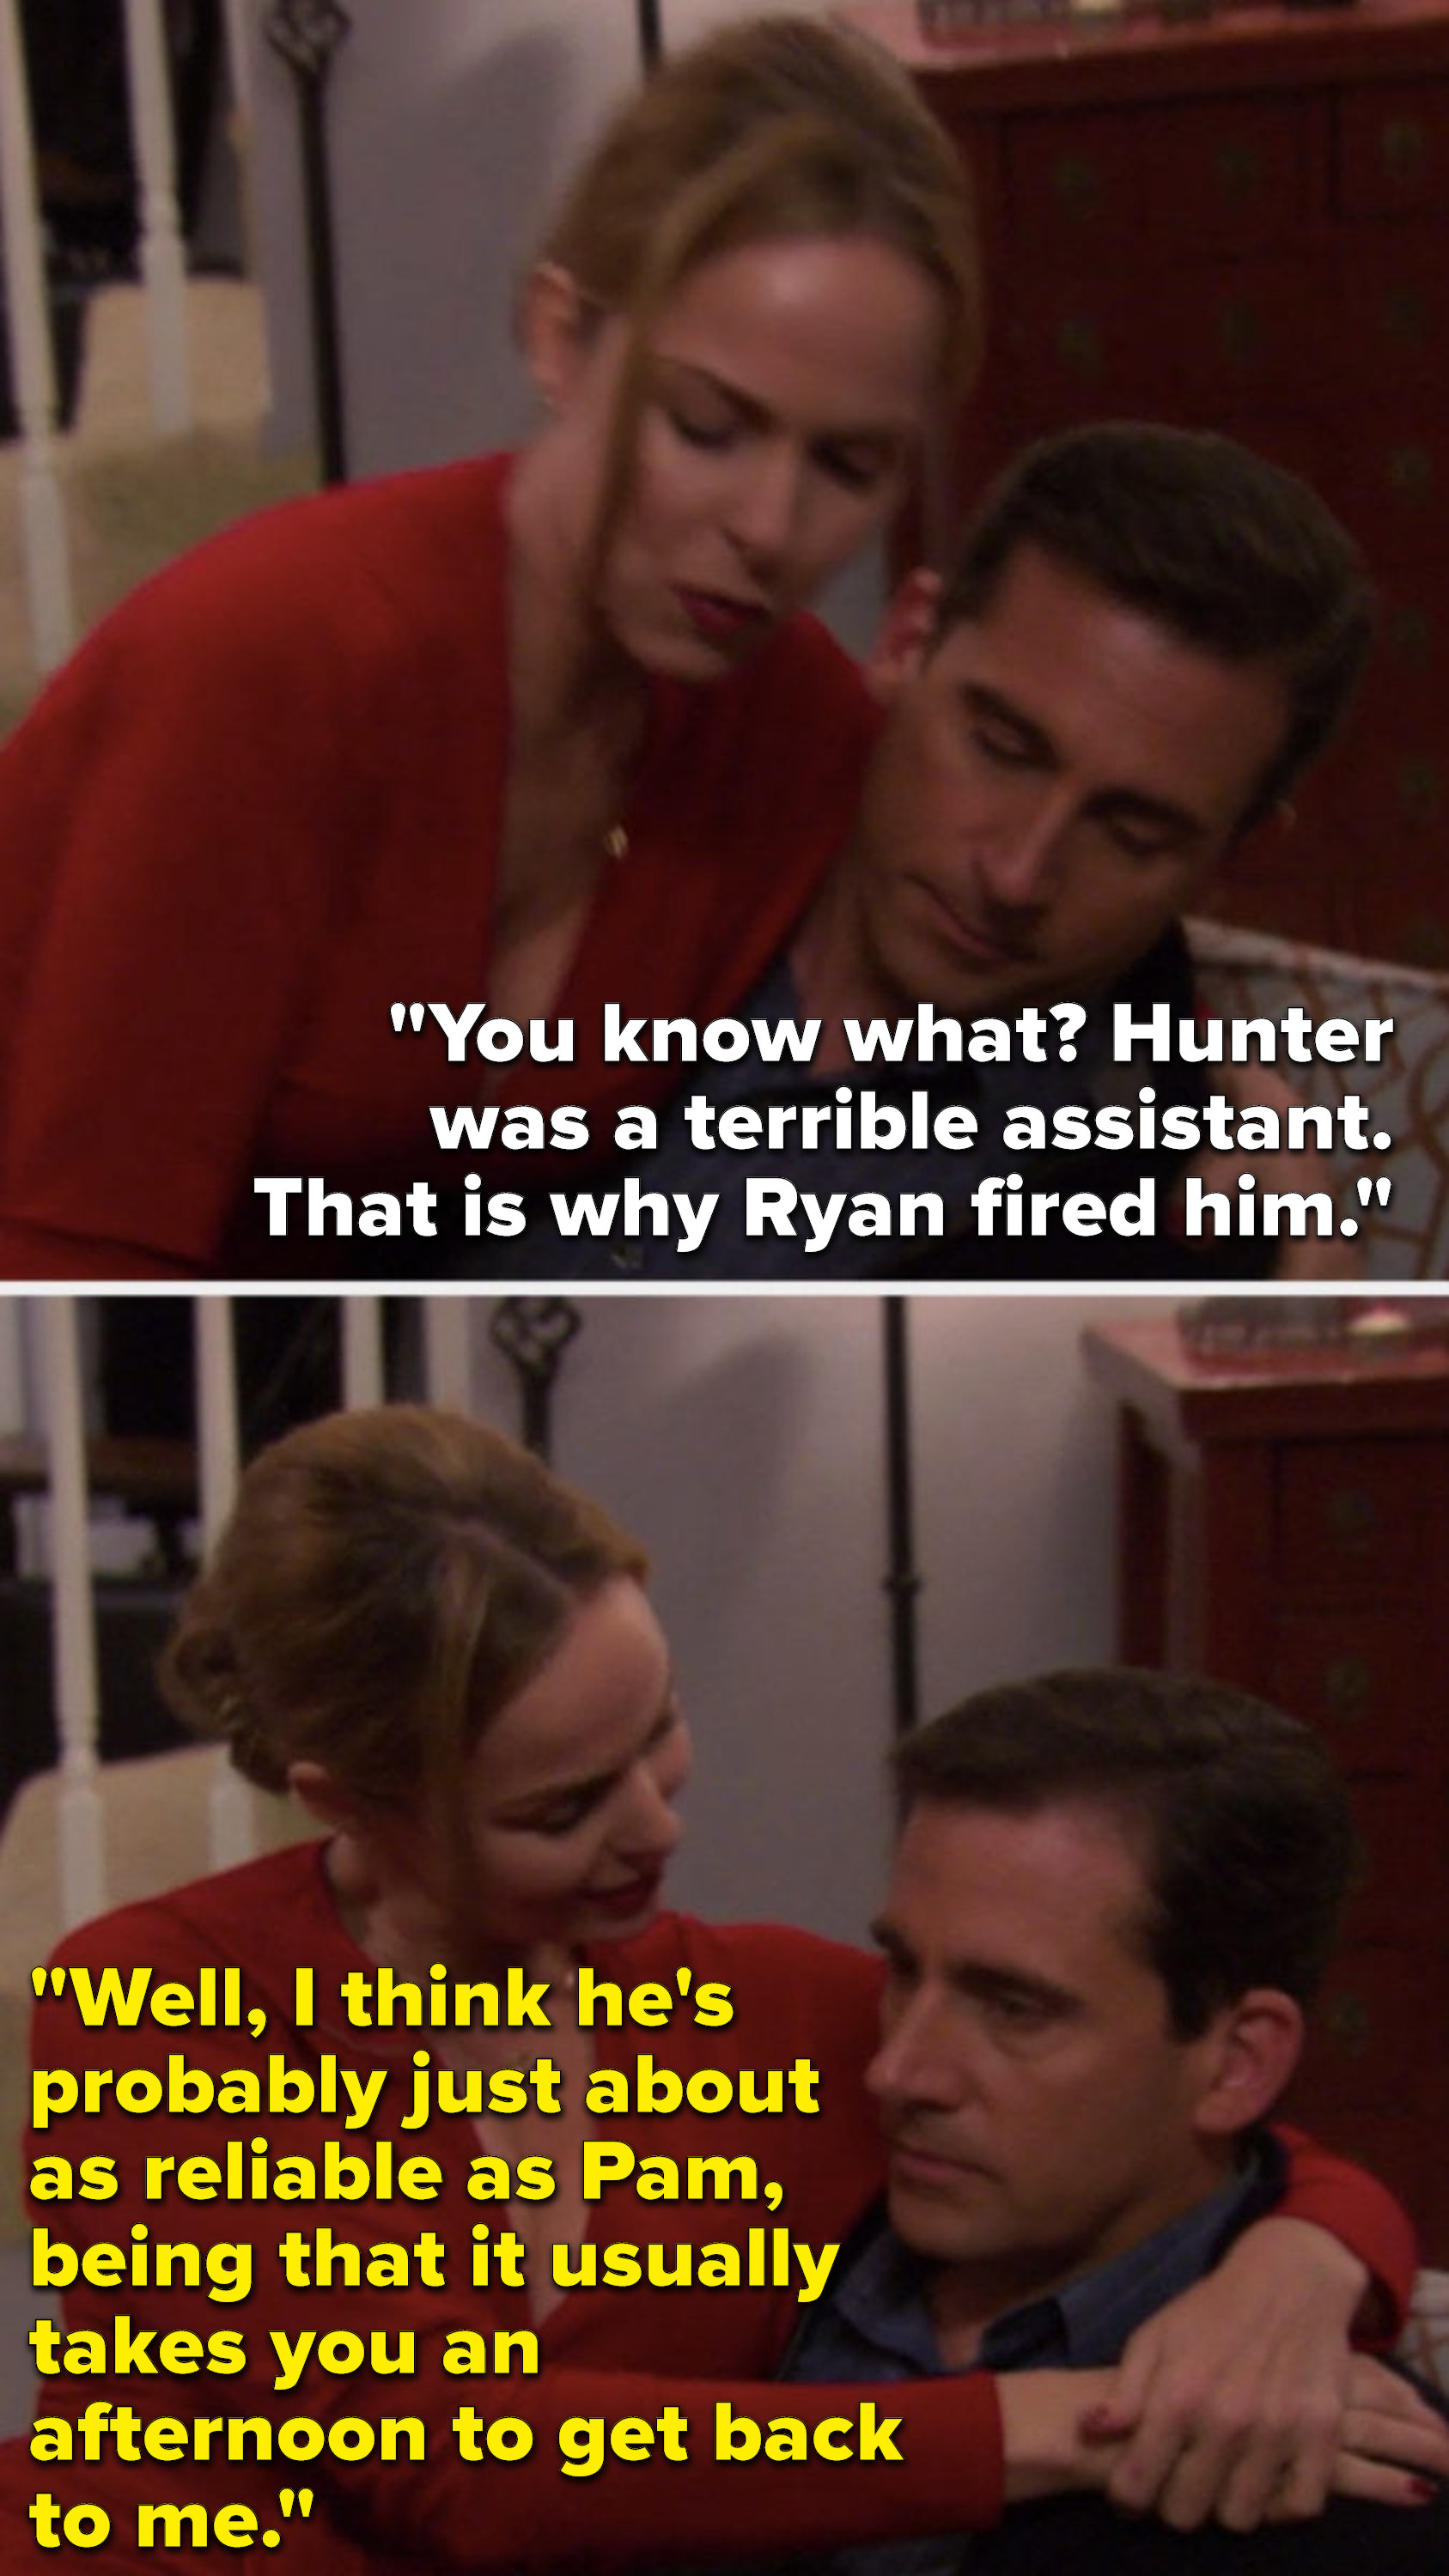 Michael says, &quot;You know what, Hunter was a terrible assistant, that is why Ryan fired him,&quot; and Jan says, &quot;Well, I think he&#x27;s probably just about as reliable as Pam, being that it usually takes you an afternoon to get back to me&quot;